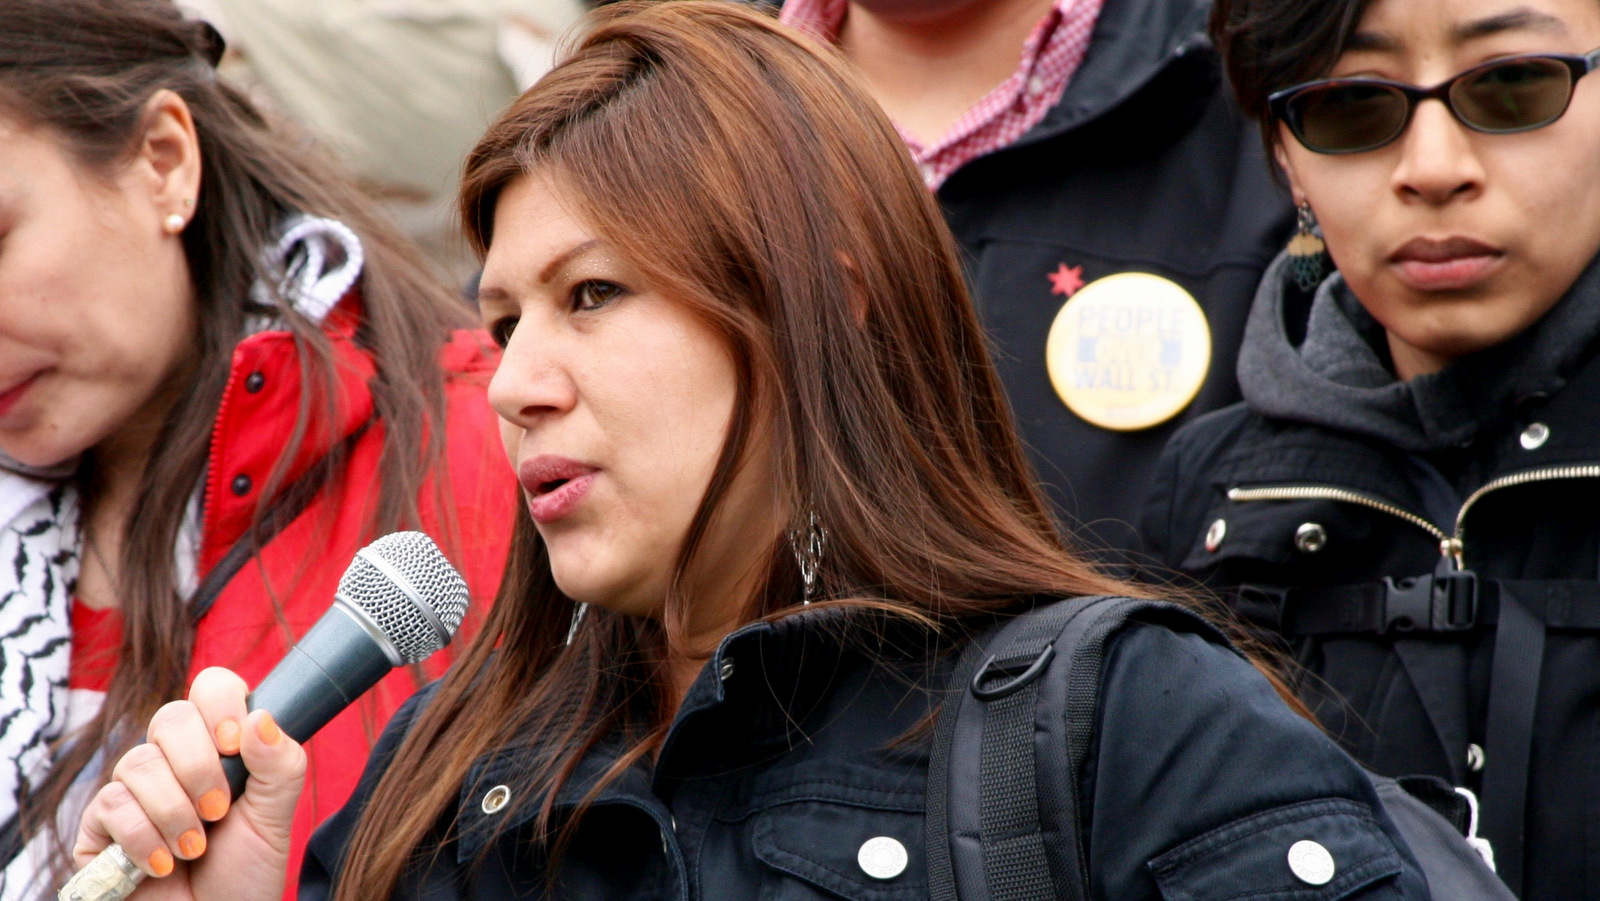 Celene Adame, wife of Wilmer Catalan-Ramirez, speaks about her husband’s arrest by Immigration and Customs Enforcement at a May Day rally at Chicago’s Union Park. (Photo: Jeanne Kuang/Injustice Watch)